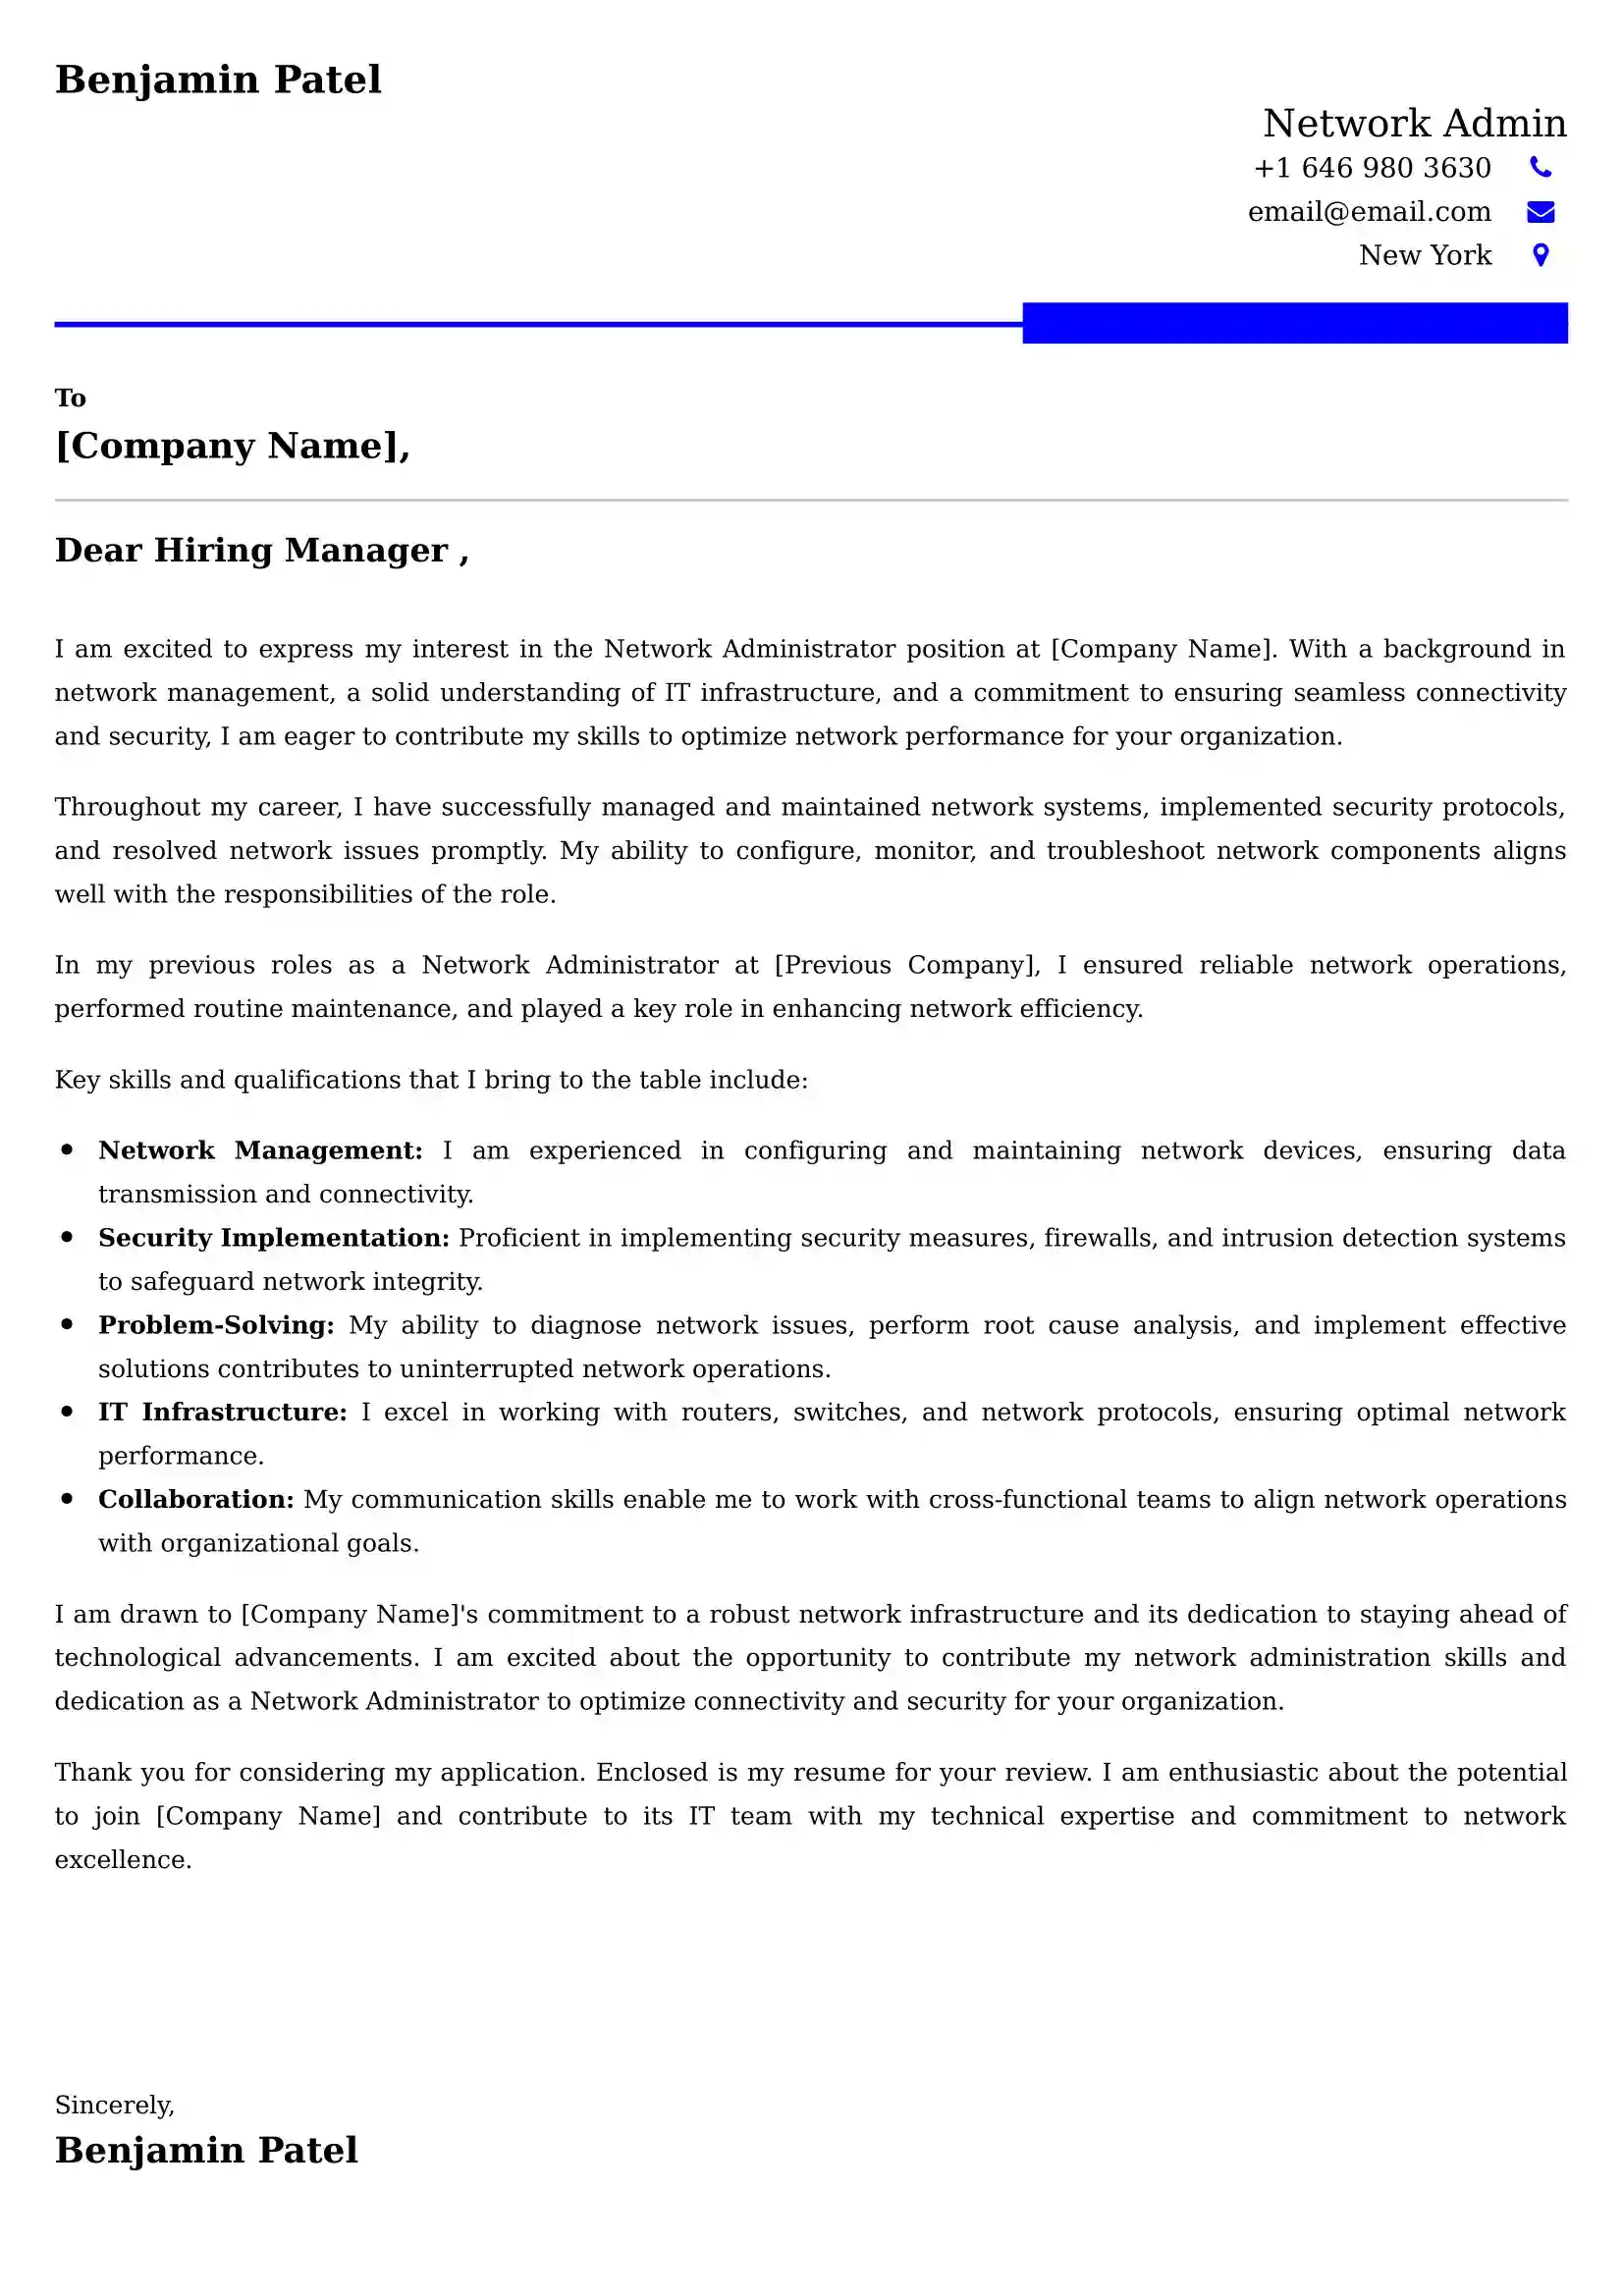 Network Admin Cover Letter Examples -Latest Brazilian Templates